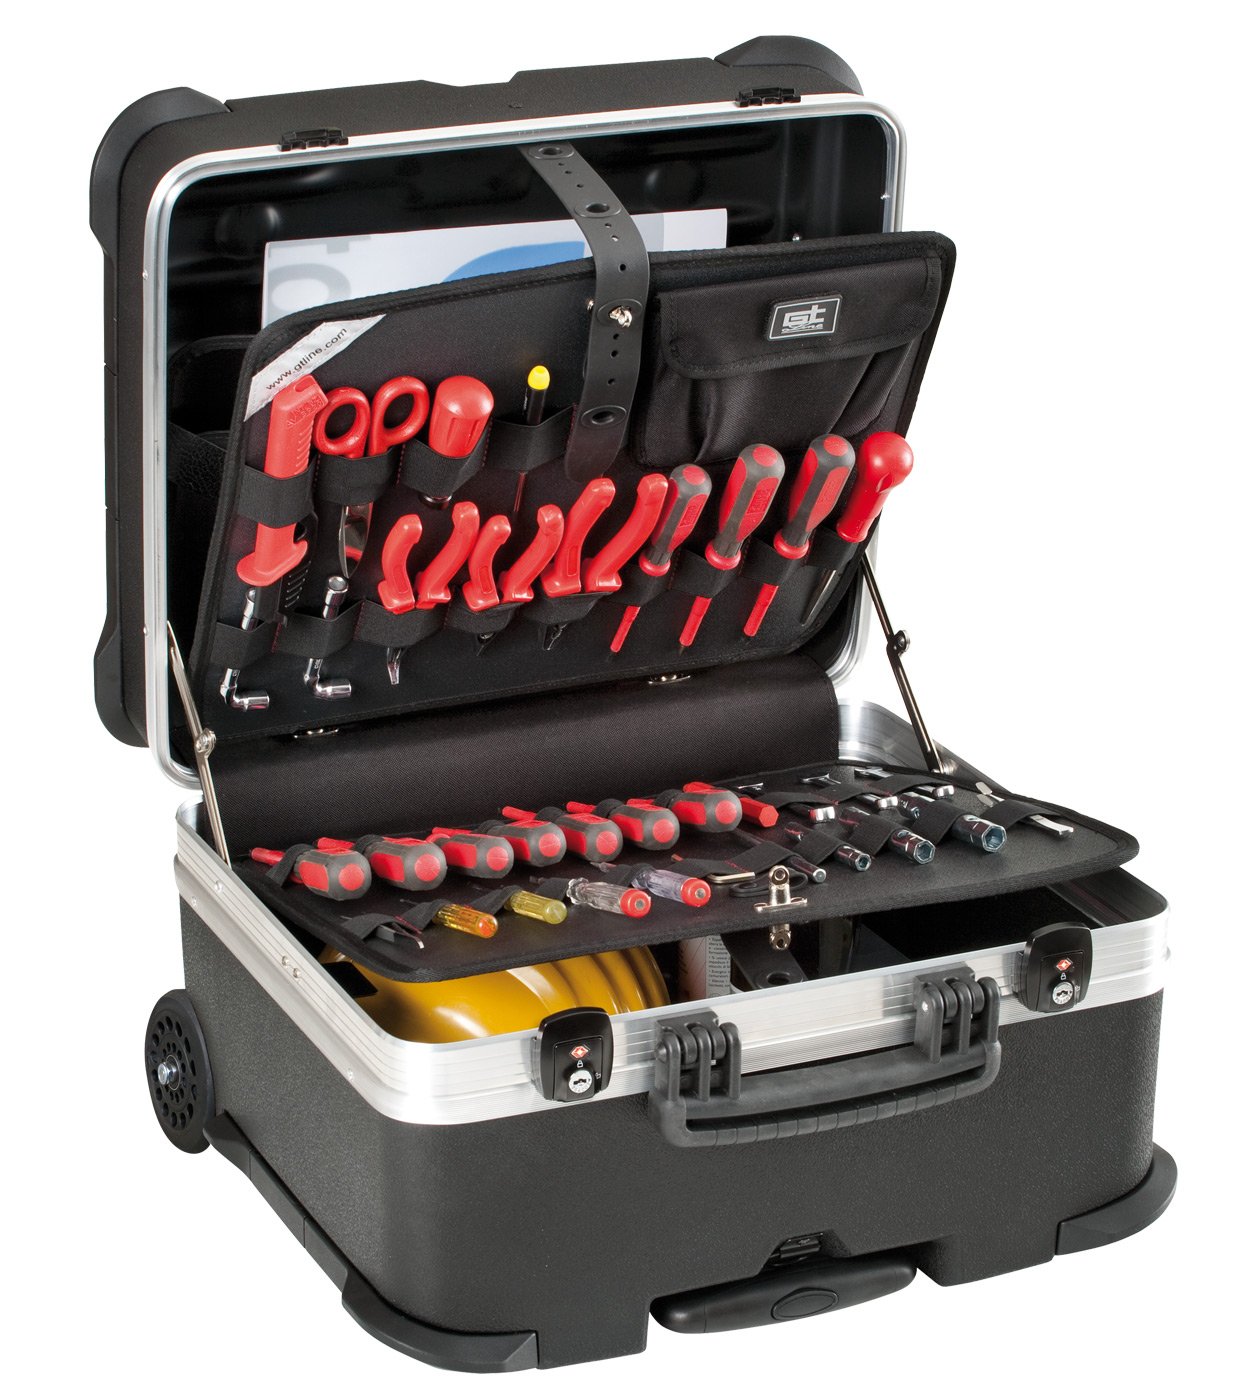 GT Line ROCK TURTLE PEL Professional Tool Trolley Case with integrated INTELLIRESPOND Technology